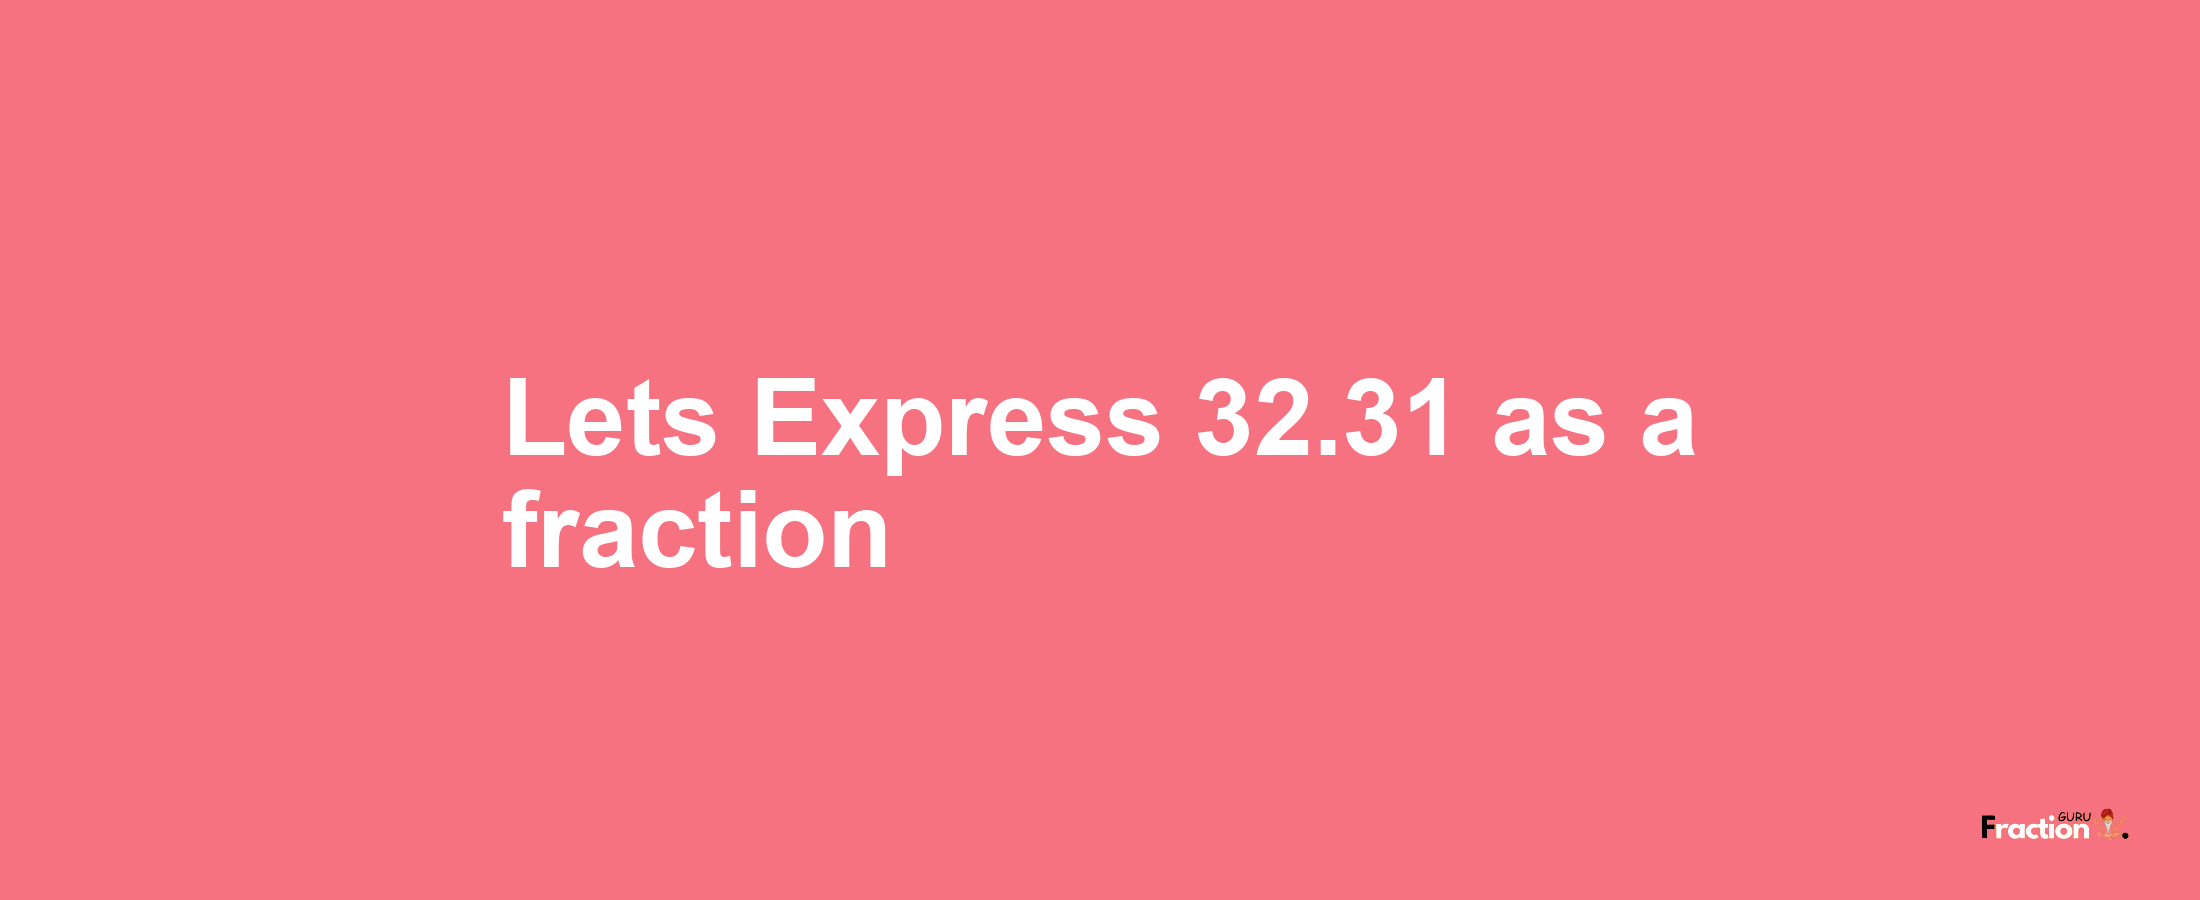 Lets Express 32.31 as afraction